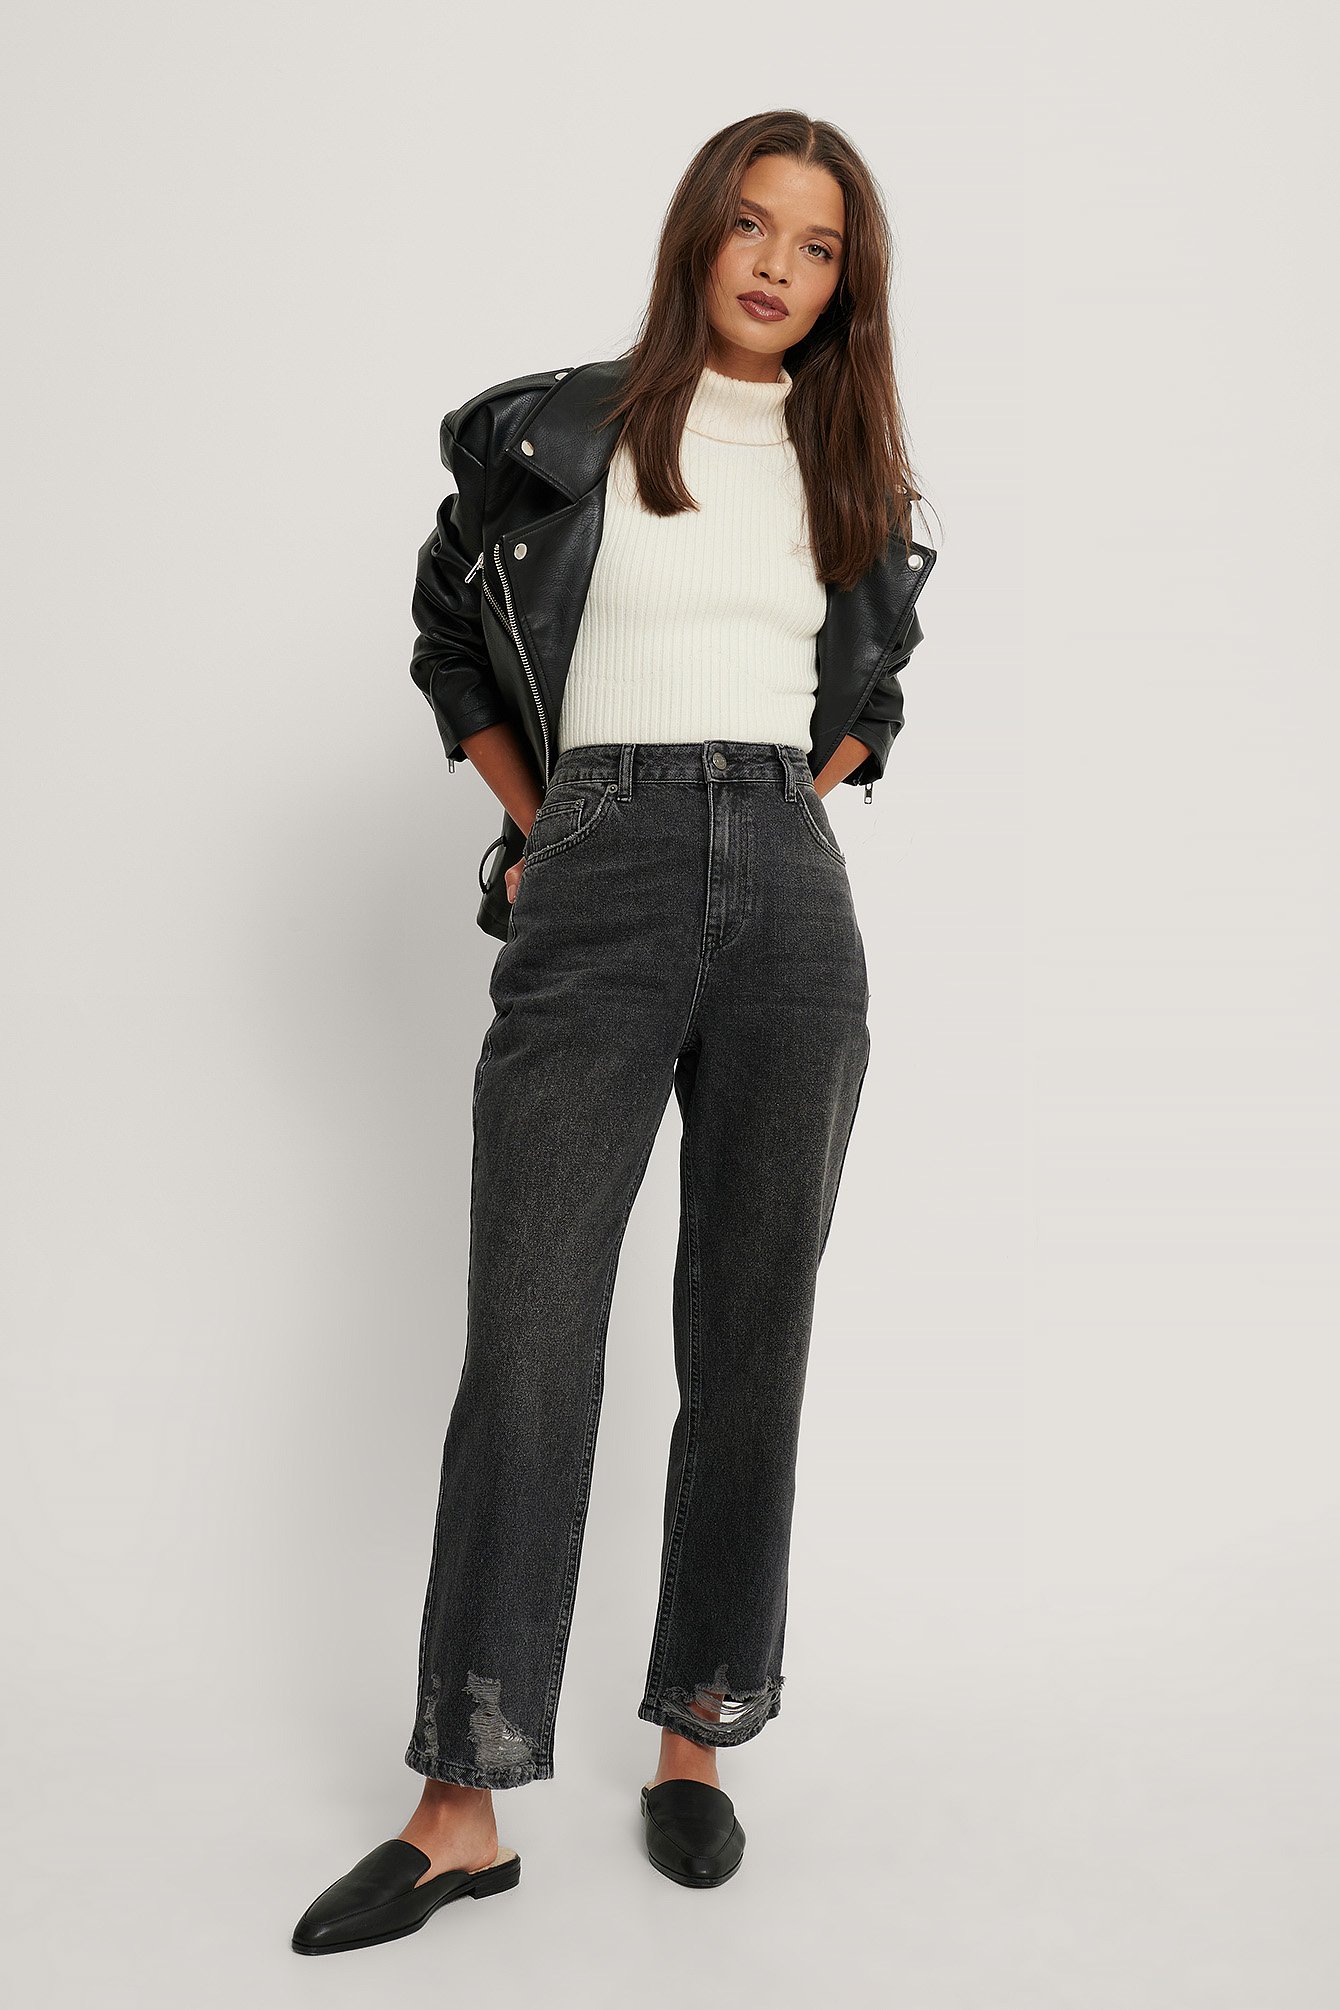 Cropped & Ankle Jeans | Women's Jeans | na-kd.com